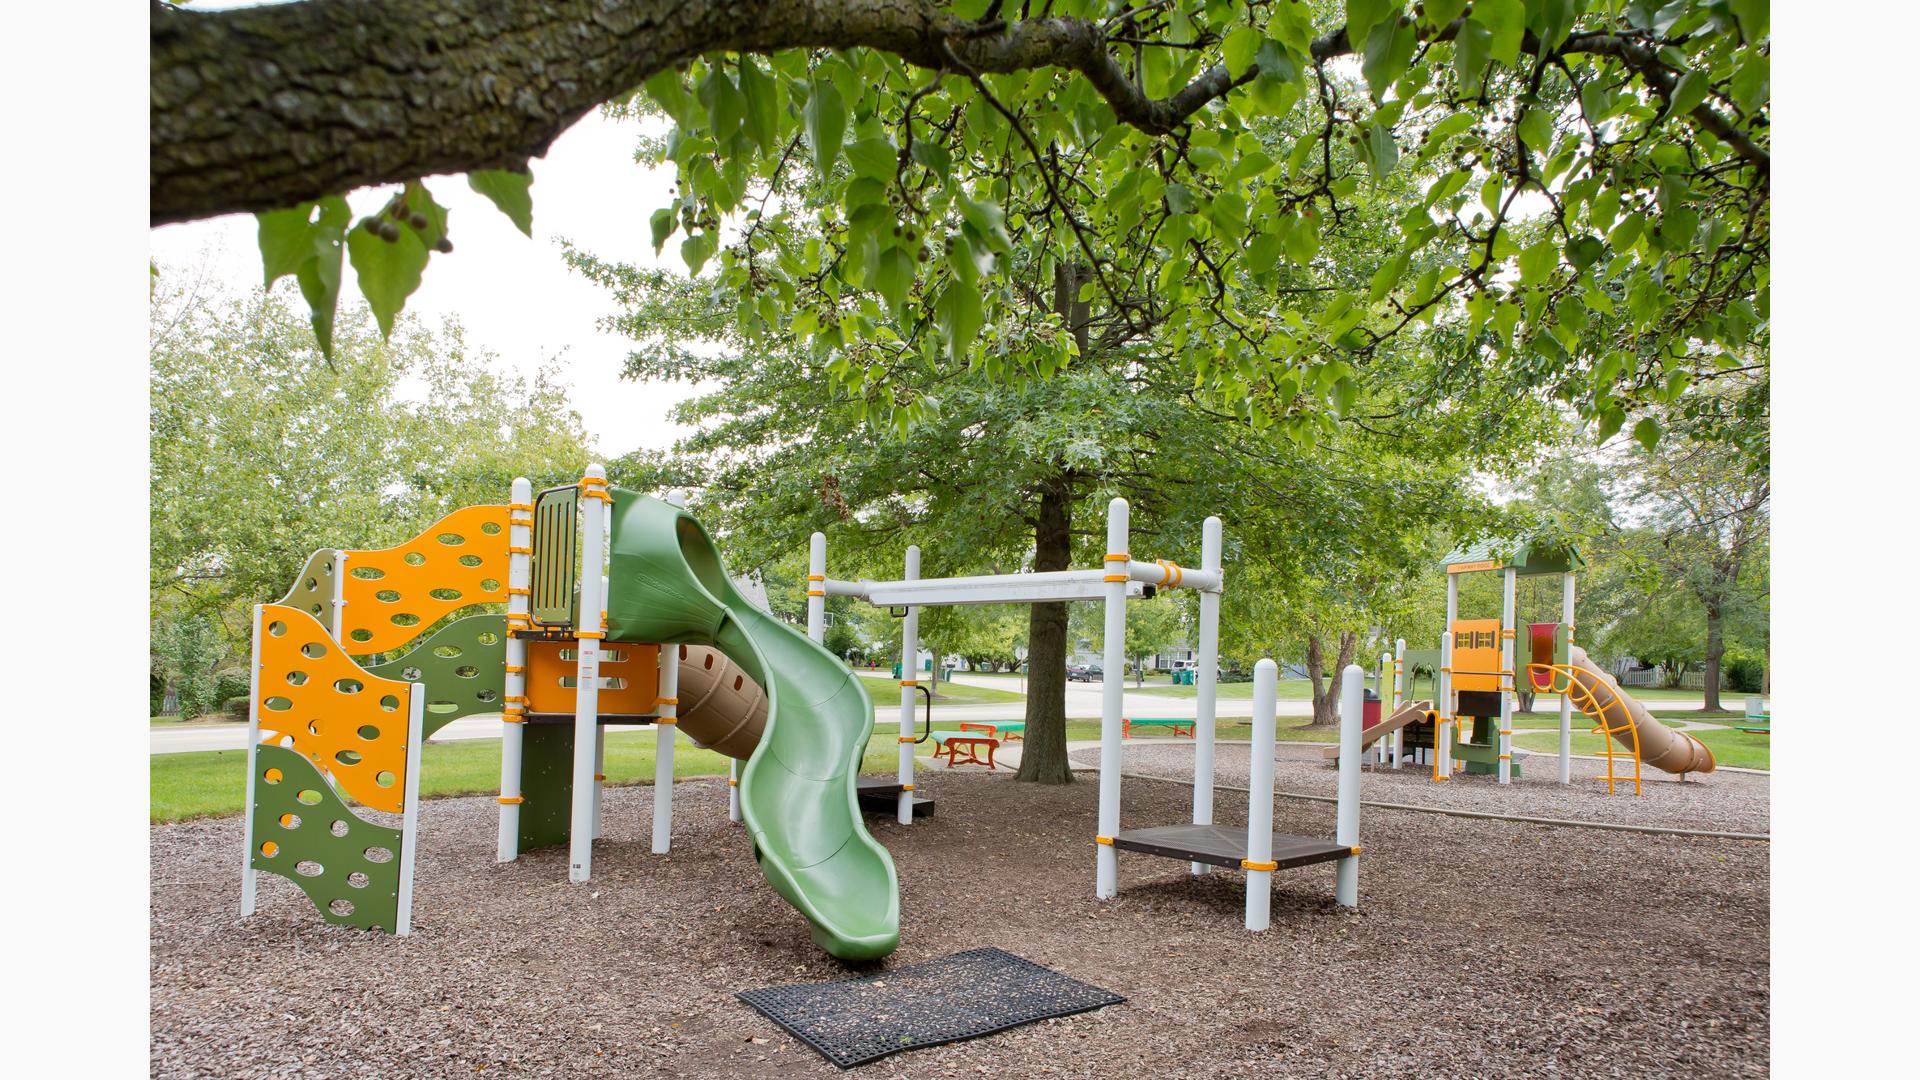 Two PlayBooster® play structures deliver play opportunities for kids ages 2 to 5 and 5 to 12. Playground sits under a full canopy of Oak trees.